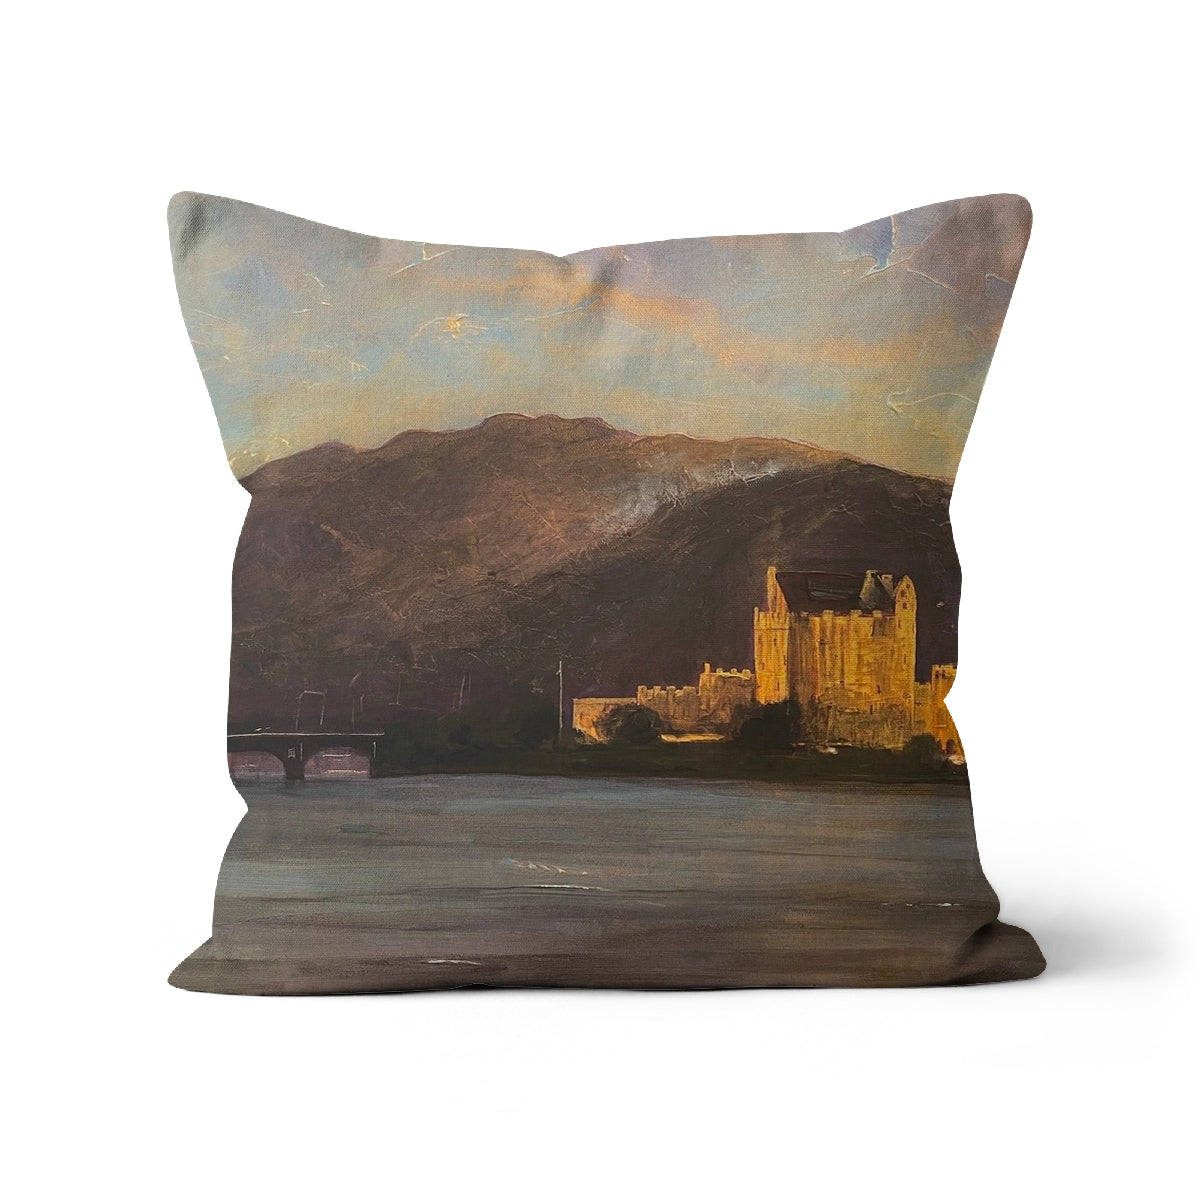 Eilean Donan Castle Art Gifts Cushion-Cushions-Historic & Iconic Scotland Art Gallery-Linen-22"x22"-Paintings, Prints, Homeware, Art Gifts From Scotland By Scottish Artist Kevin Hunter